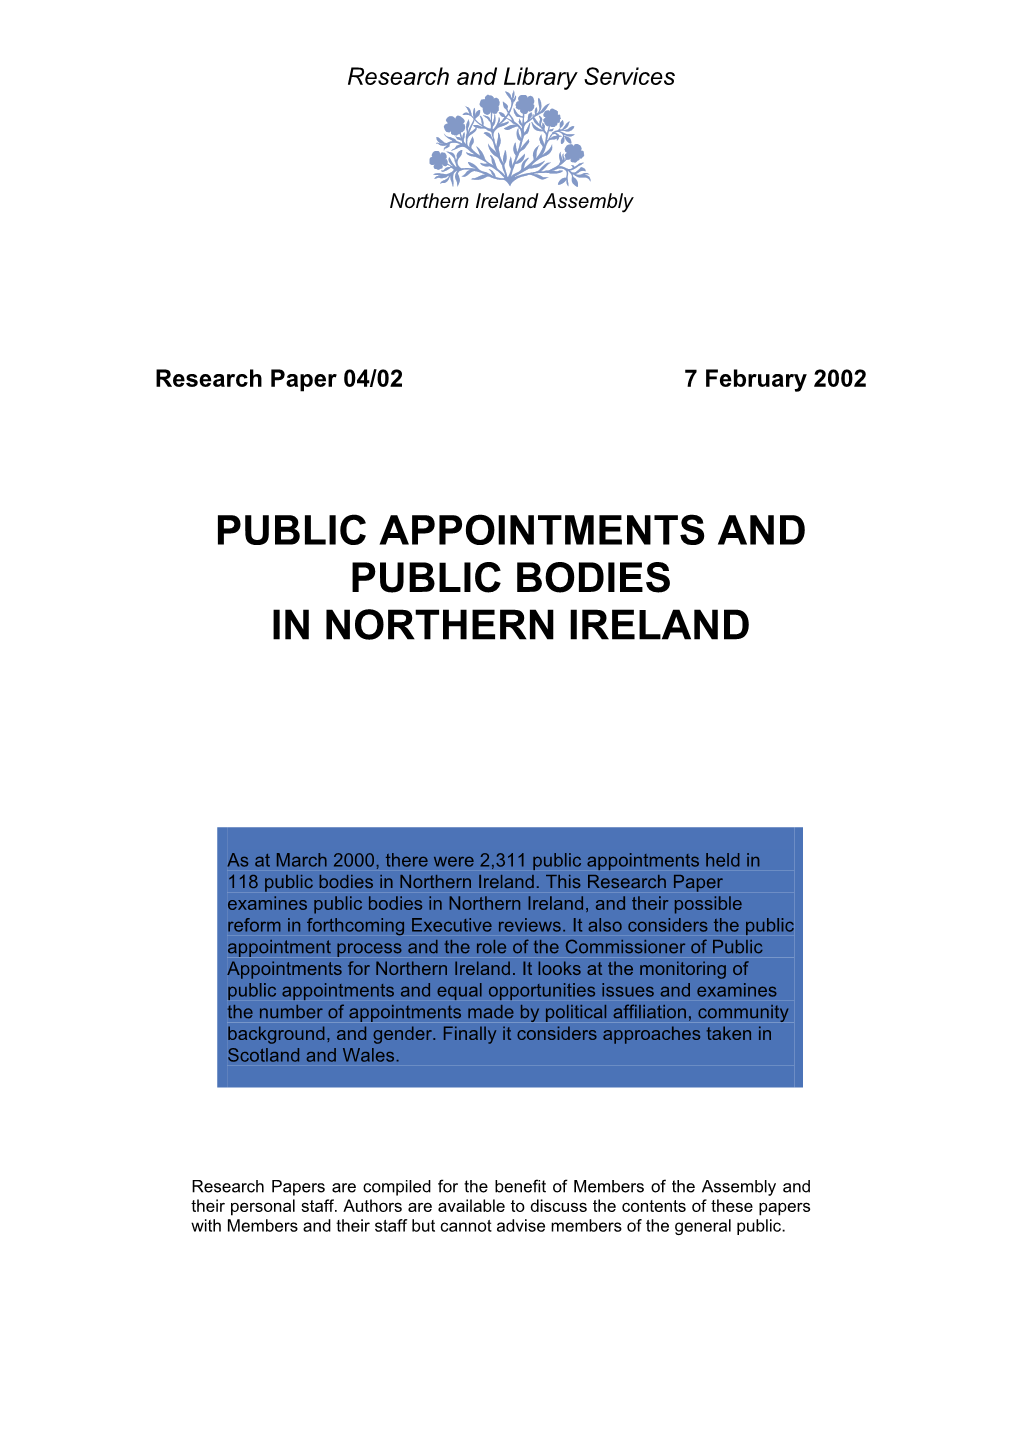 Public Appointments and Public Bodies in Northern Ireland